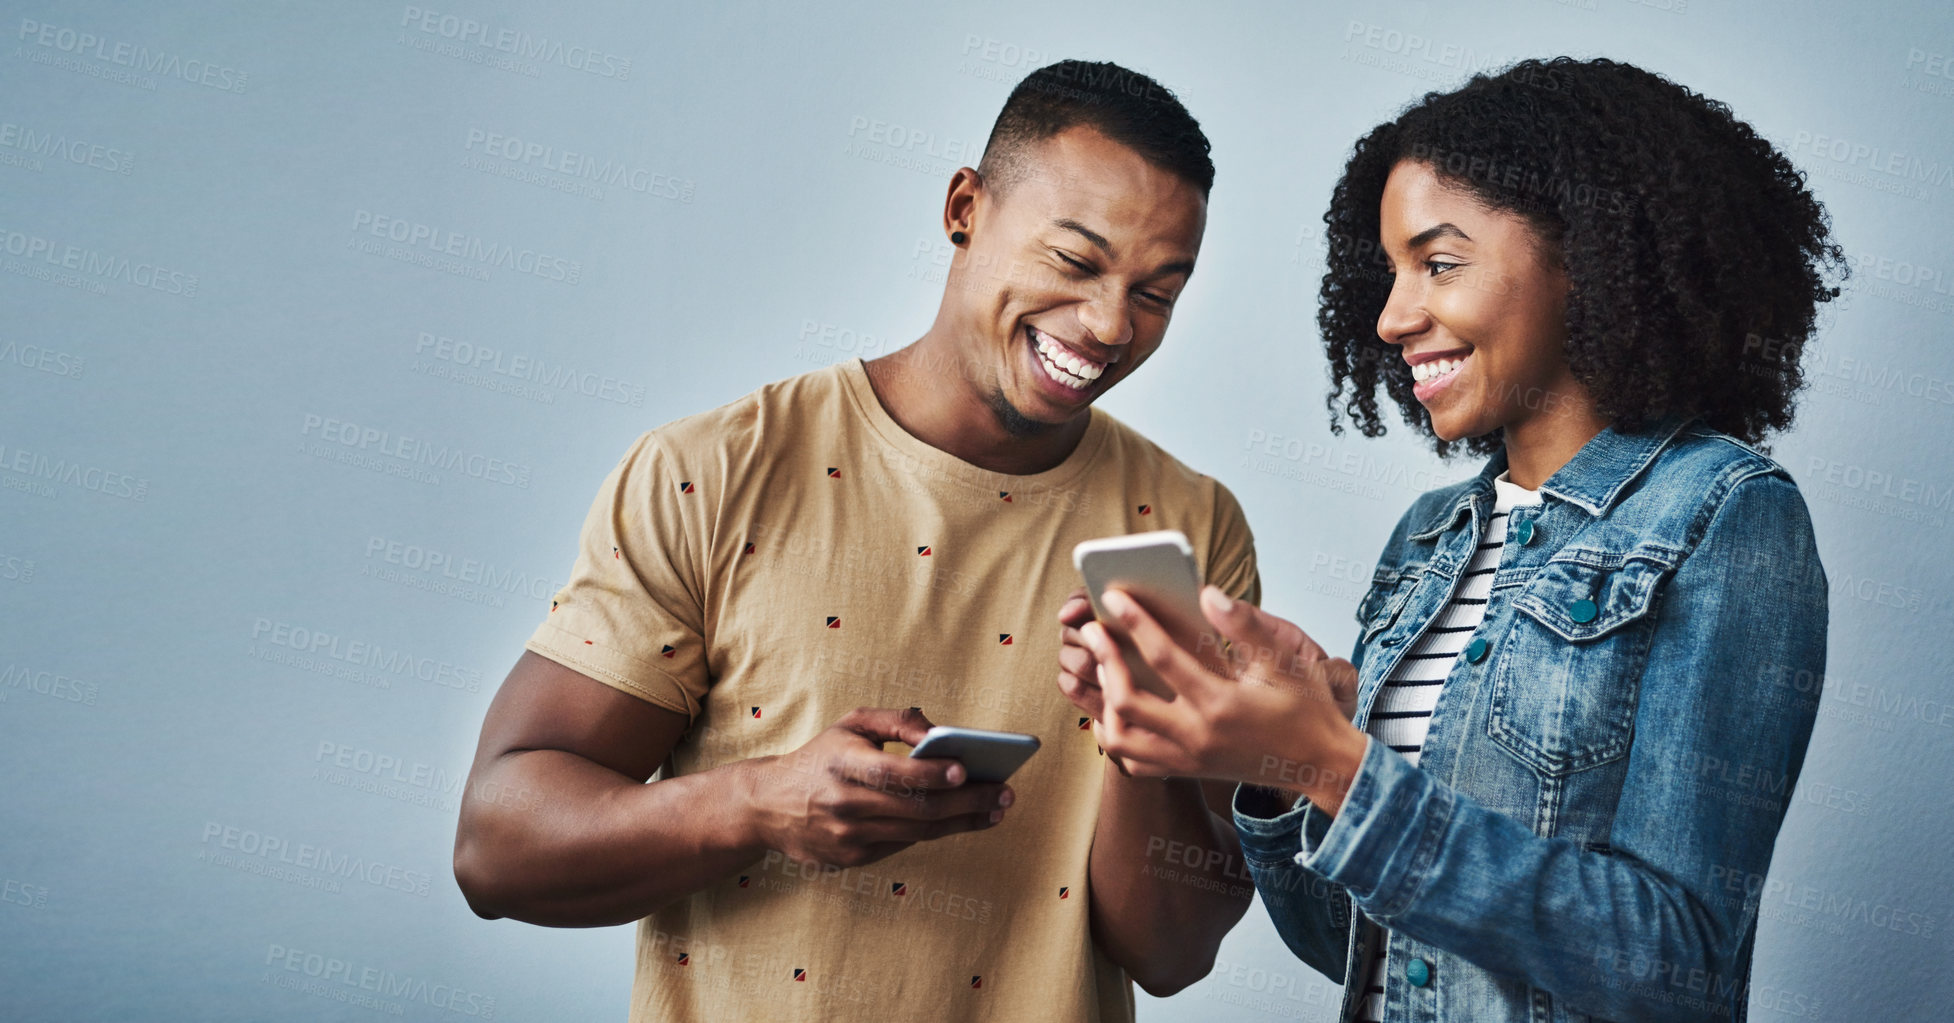 Buy stock photo Studio shot of a young man and woman using a mobile phone together against a gray background